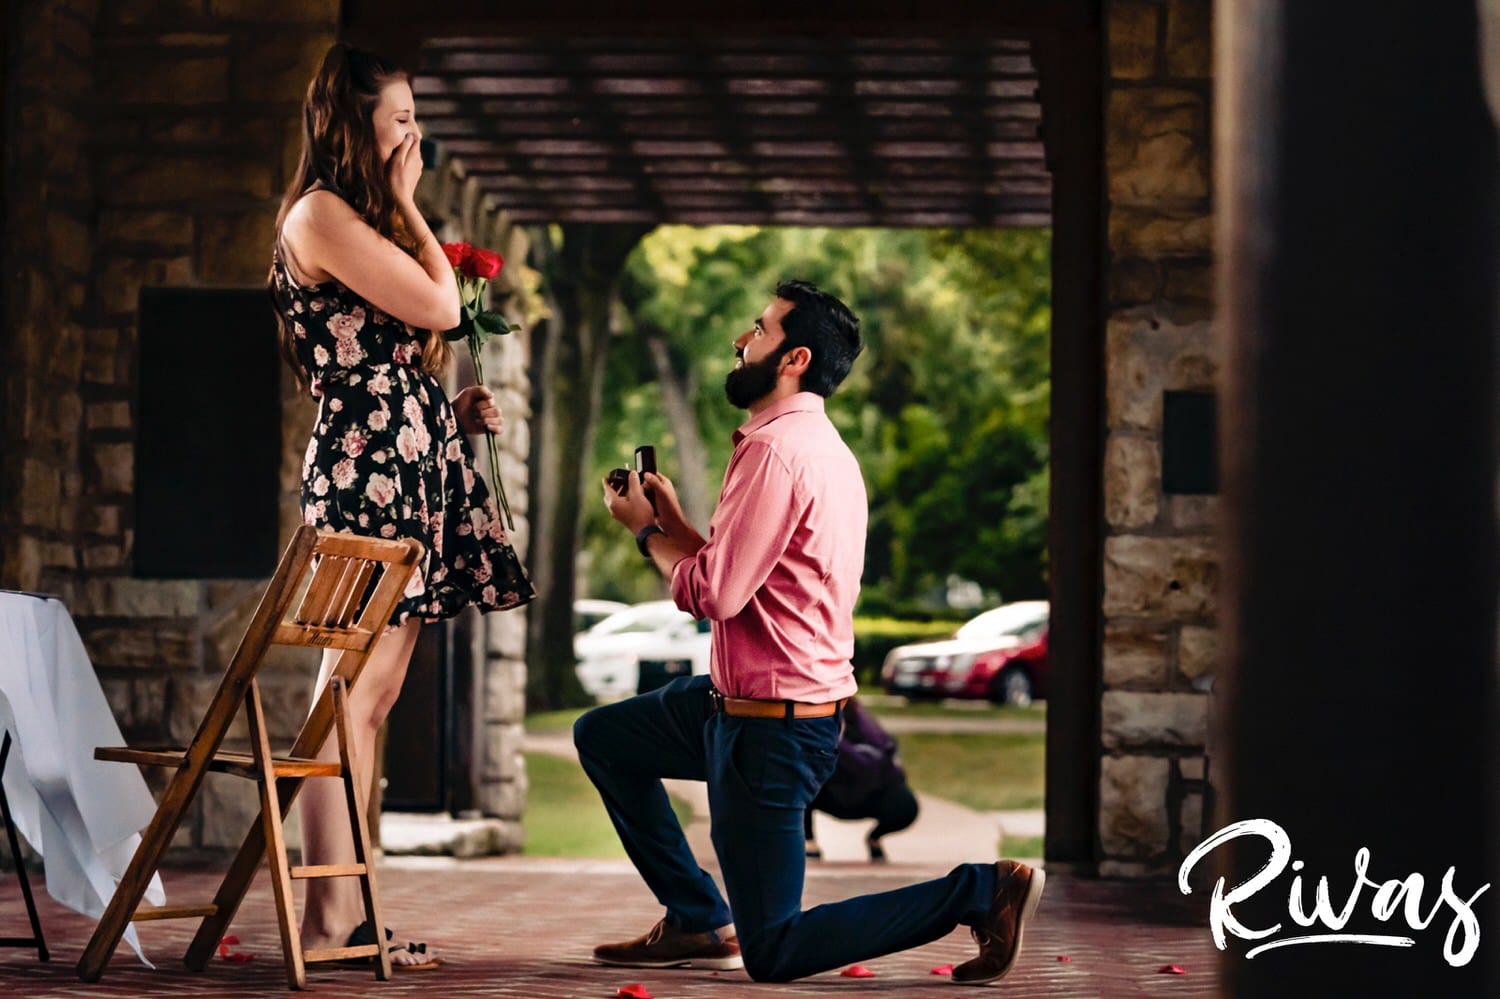 A colorful, candid picture of a man down on one knee holding a ring box and surprise proposing to his girlfriend at Loose Park in Kansas City. 